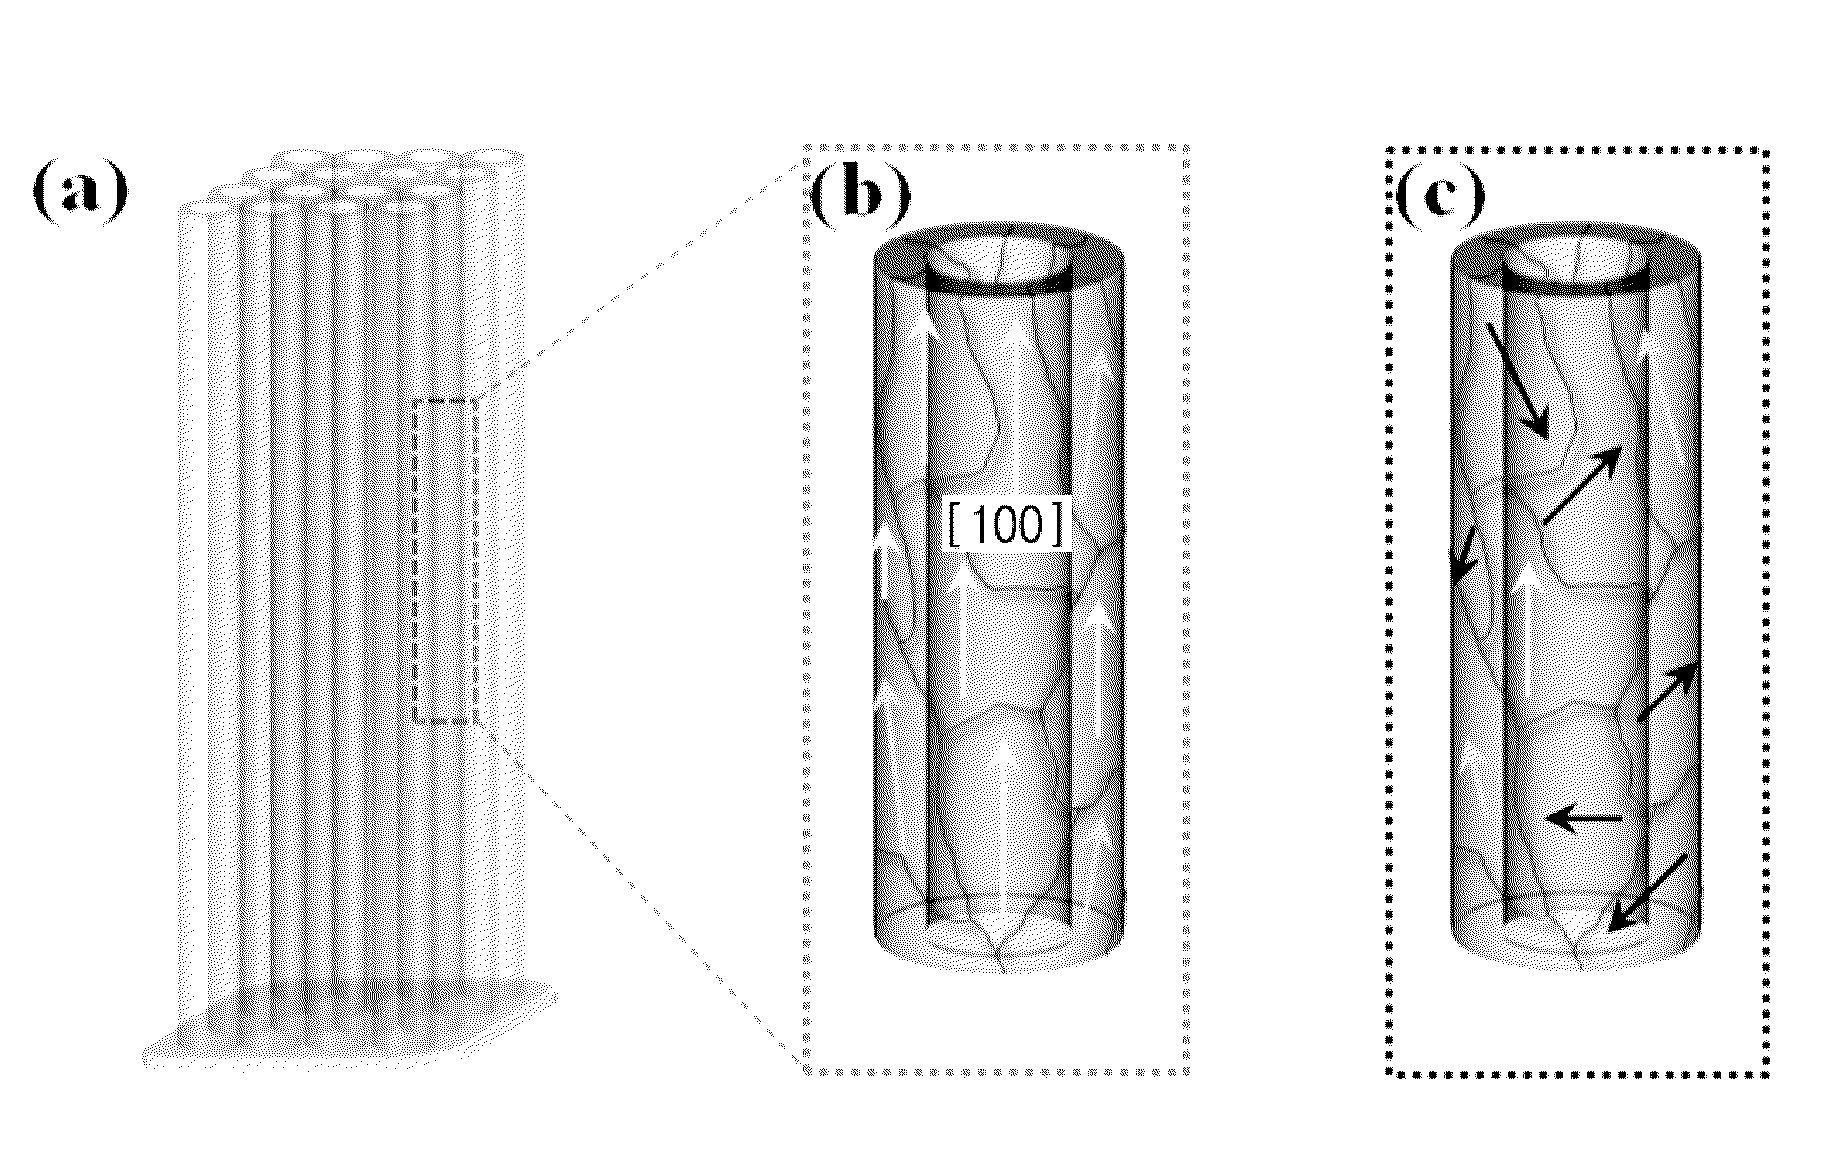 Titanium oxide nano tube material and method for manufacturing the same